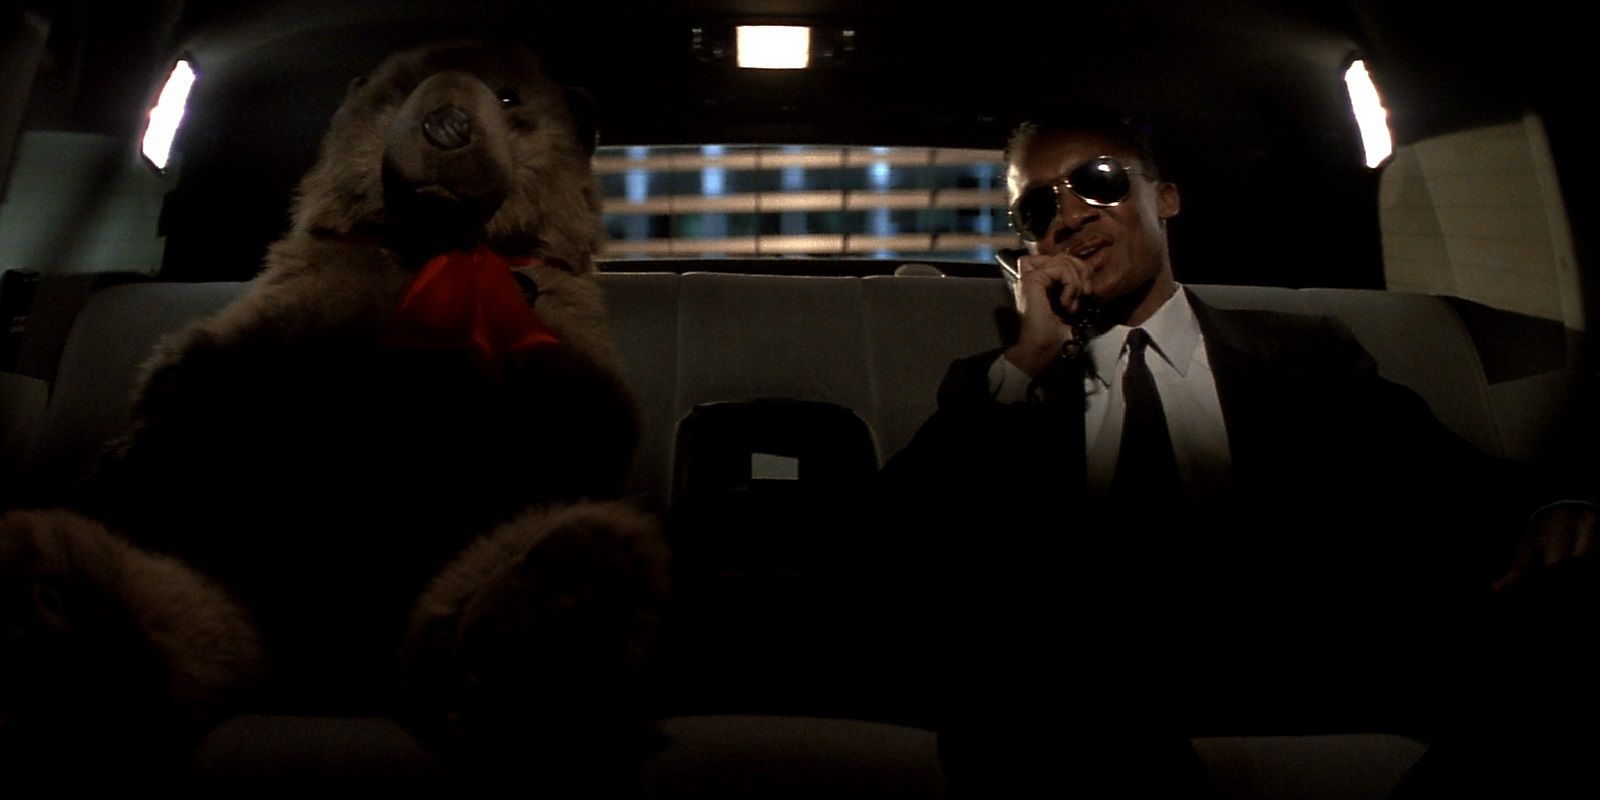 Argyle in Die Hard in the back of a car with a teddy bear.